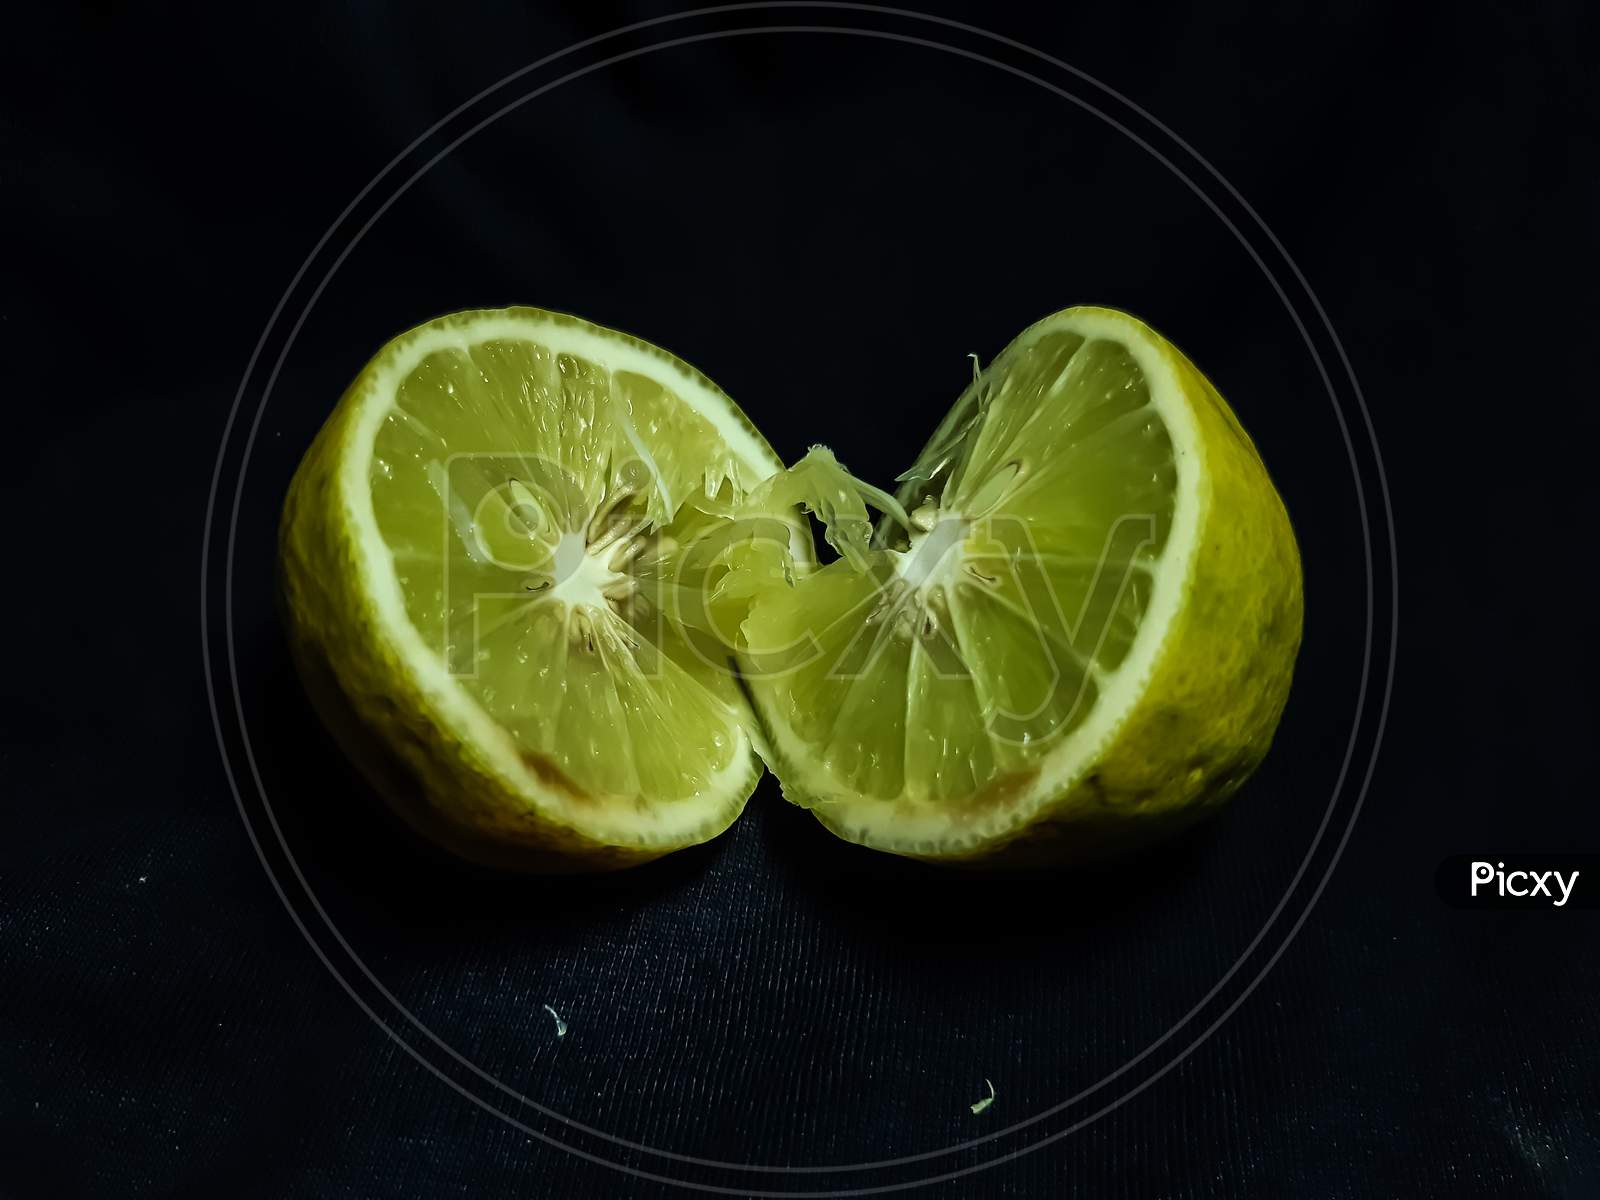 A Lemon Is Cut In The Middle And Placed On A Black Background.